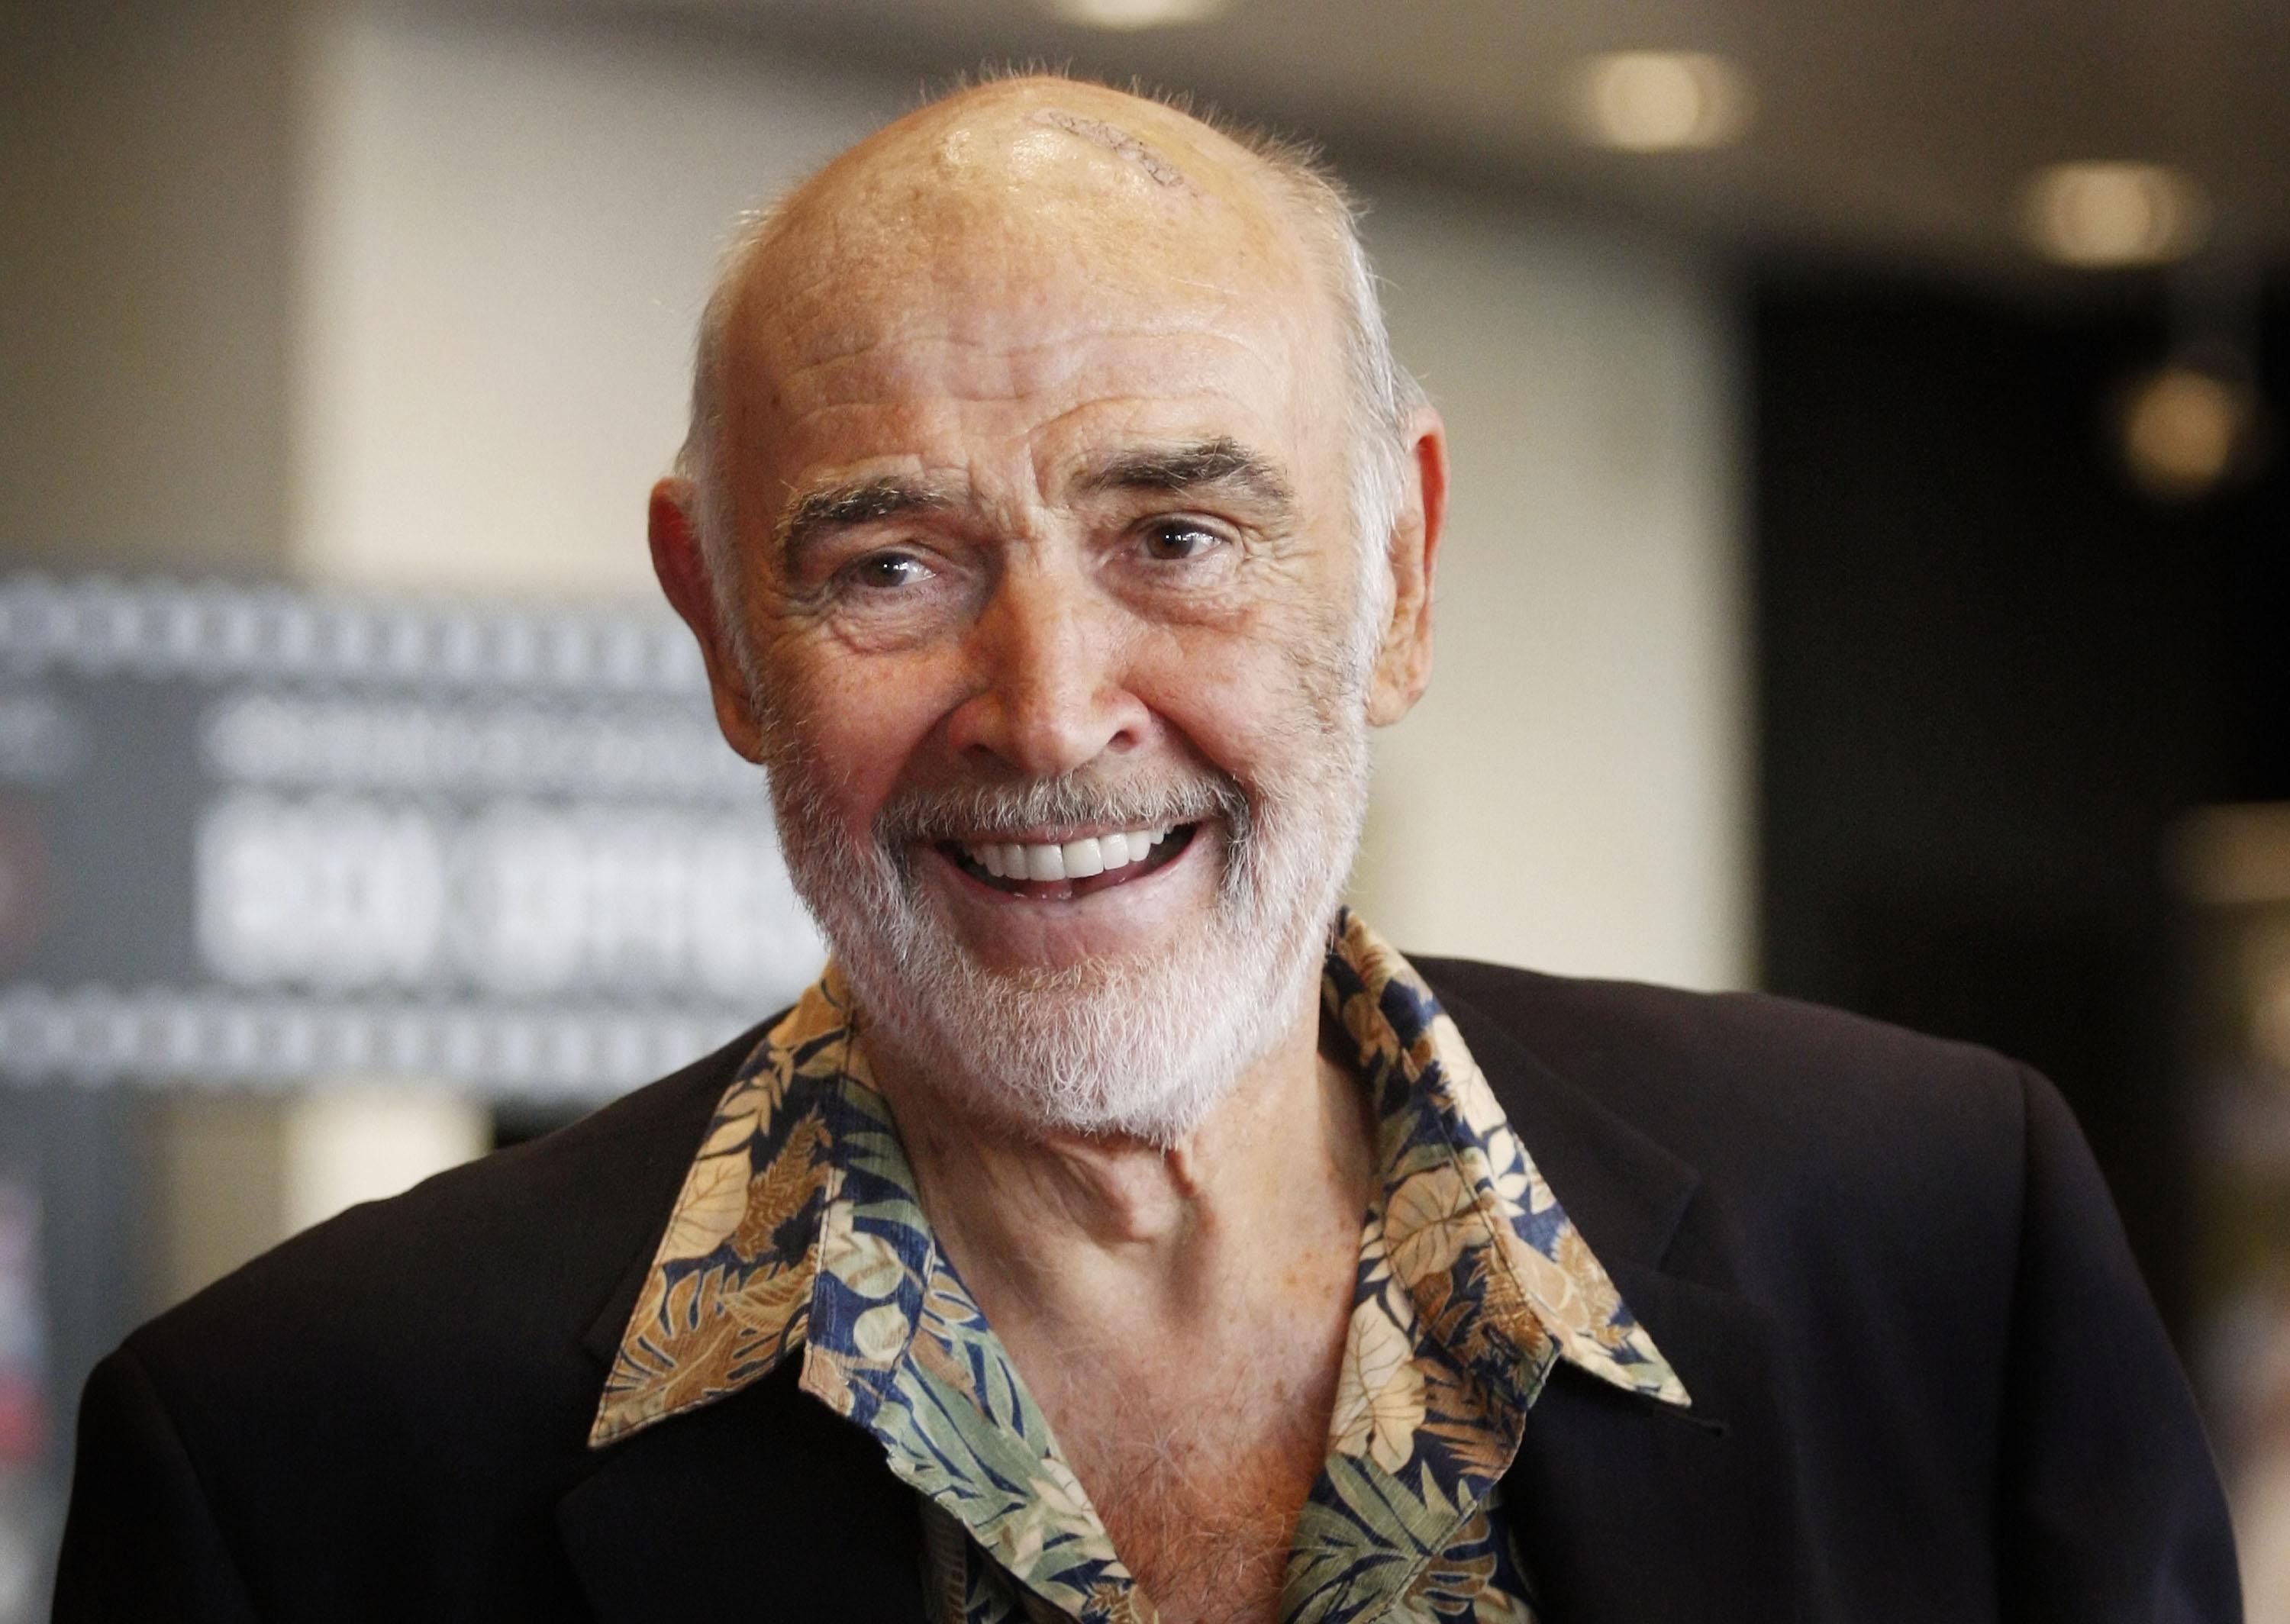 Veteran actor Sean Connery attends the screening of the 1975 classic film "The Man Who Would be King" at the Edinburgh International Film Festival in Edinburgh, Scotland. | Photo: Getty Images